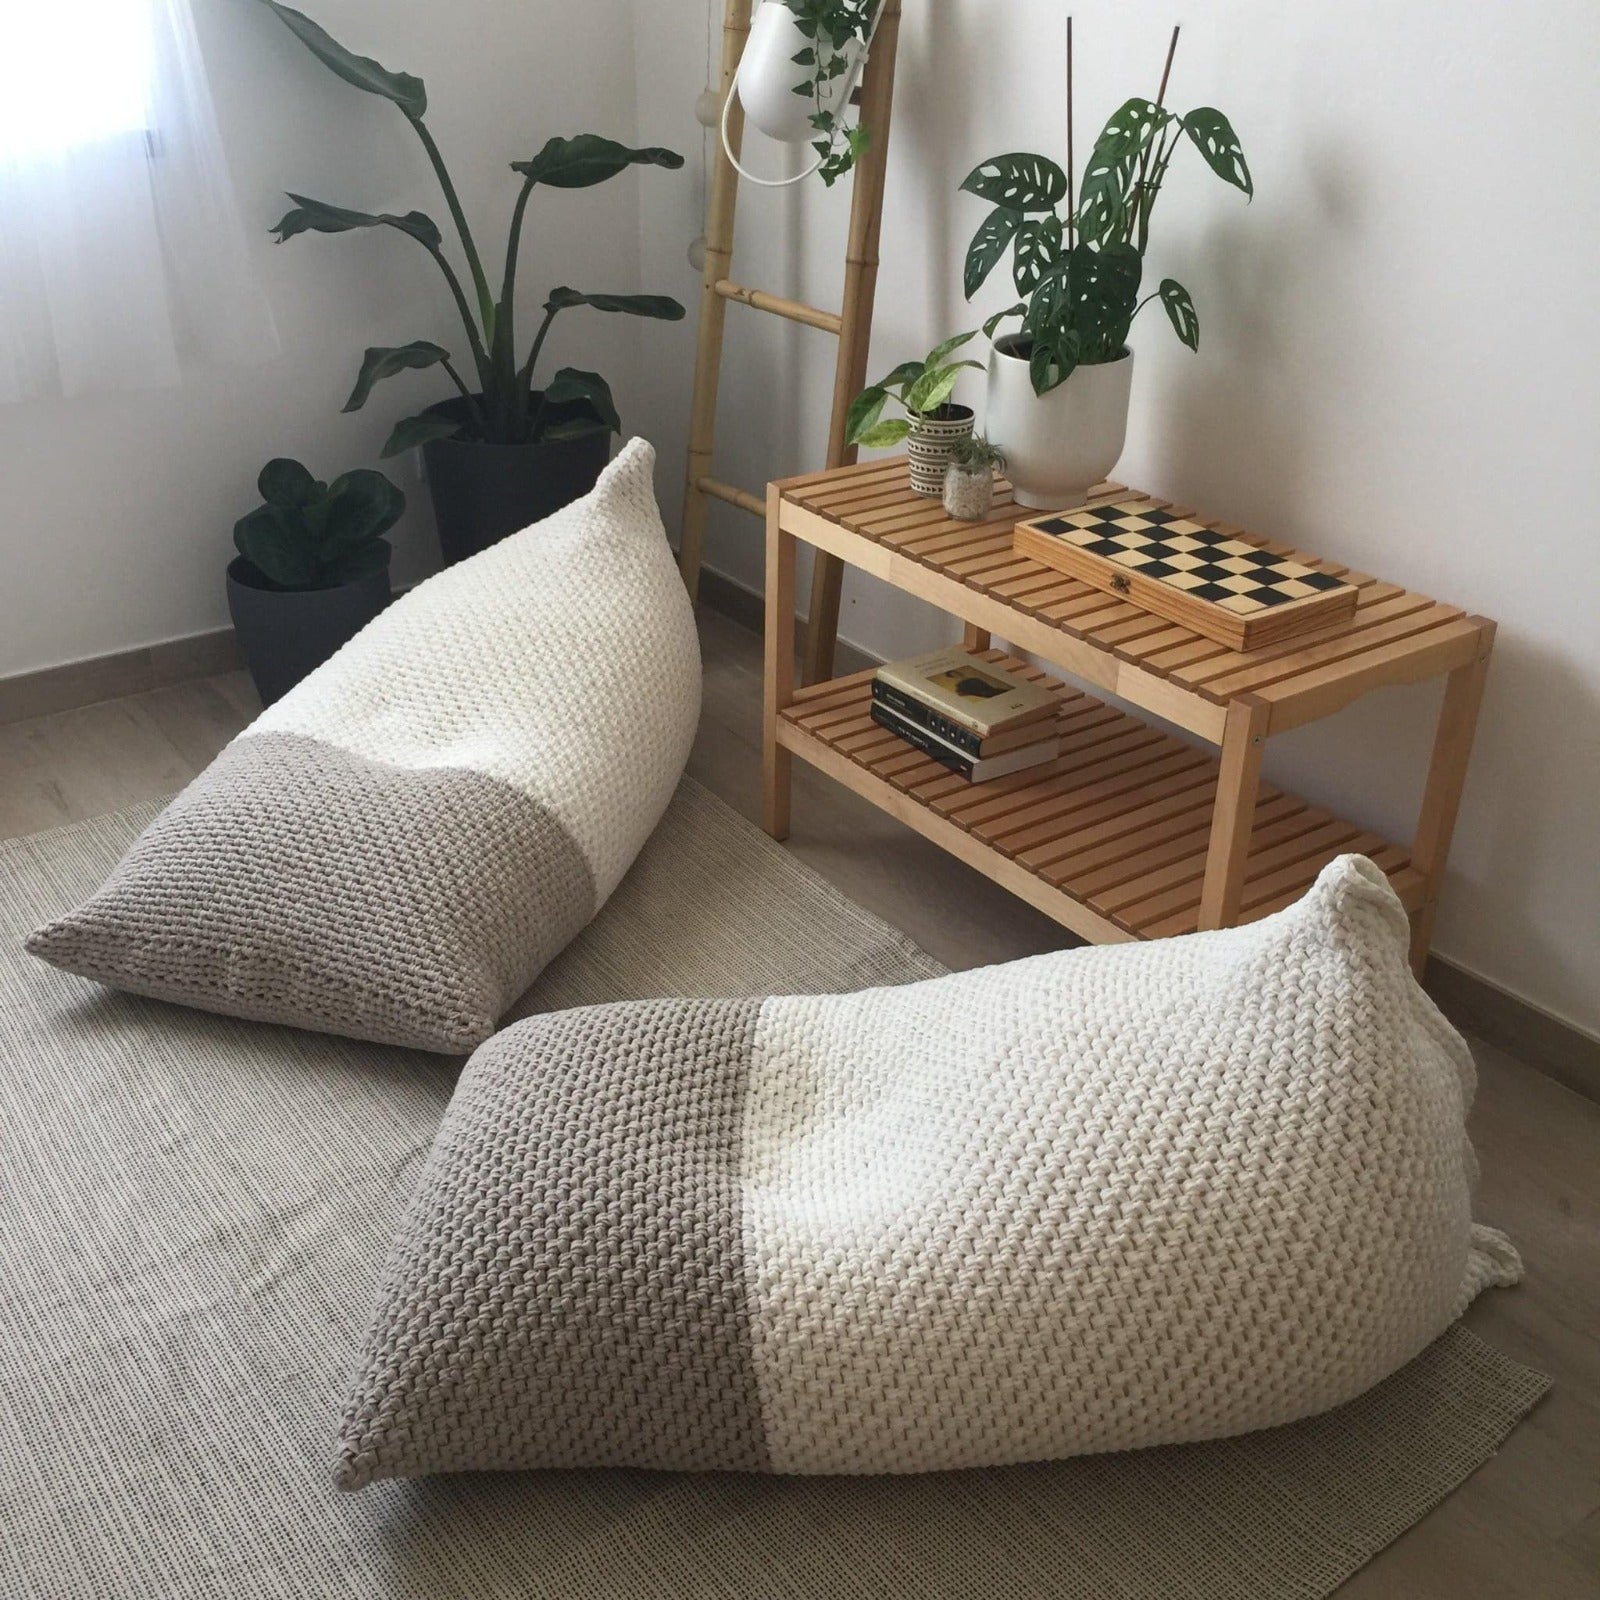 Wool Cushion for Poang Chair with Removable Cover